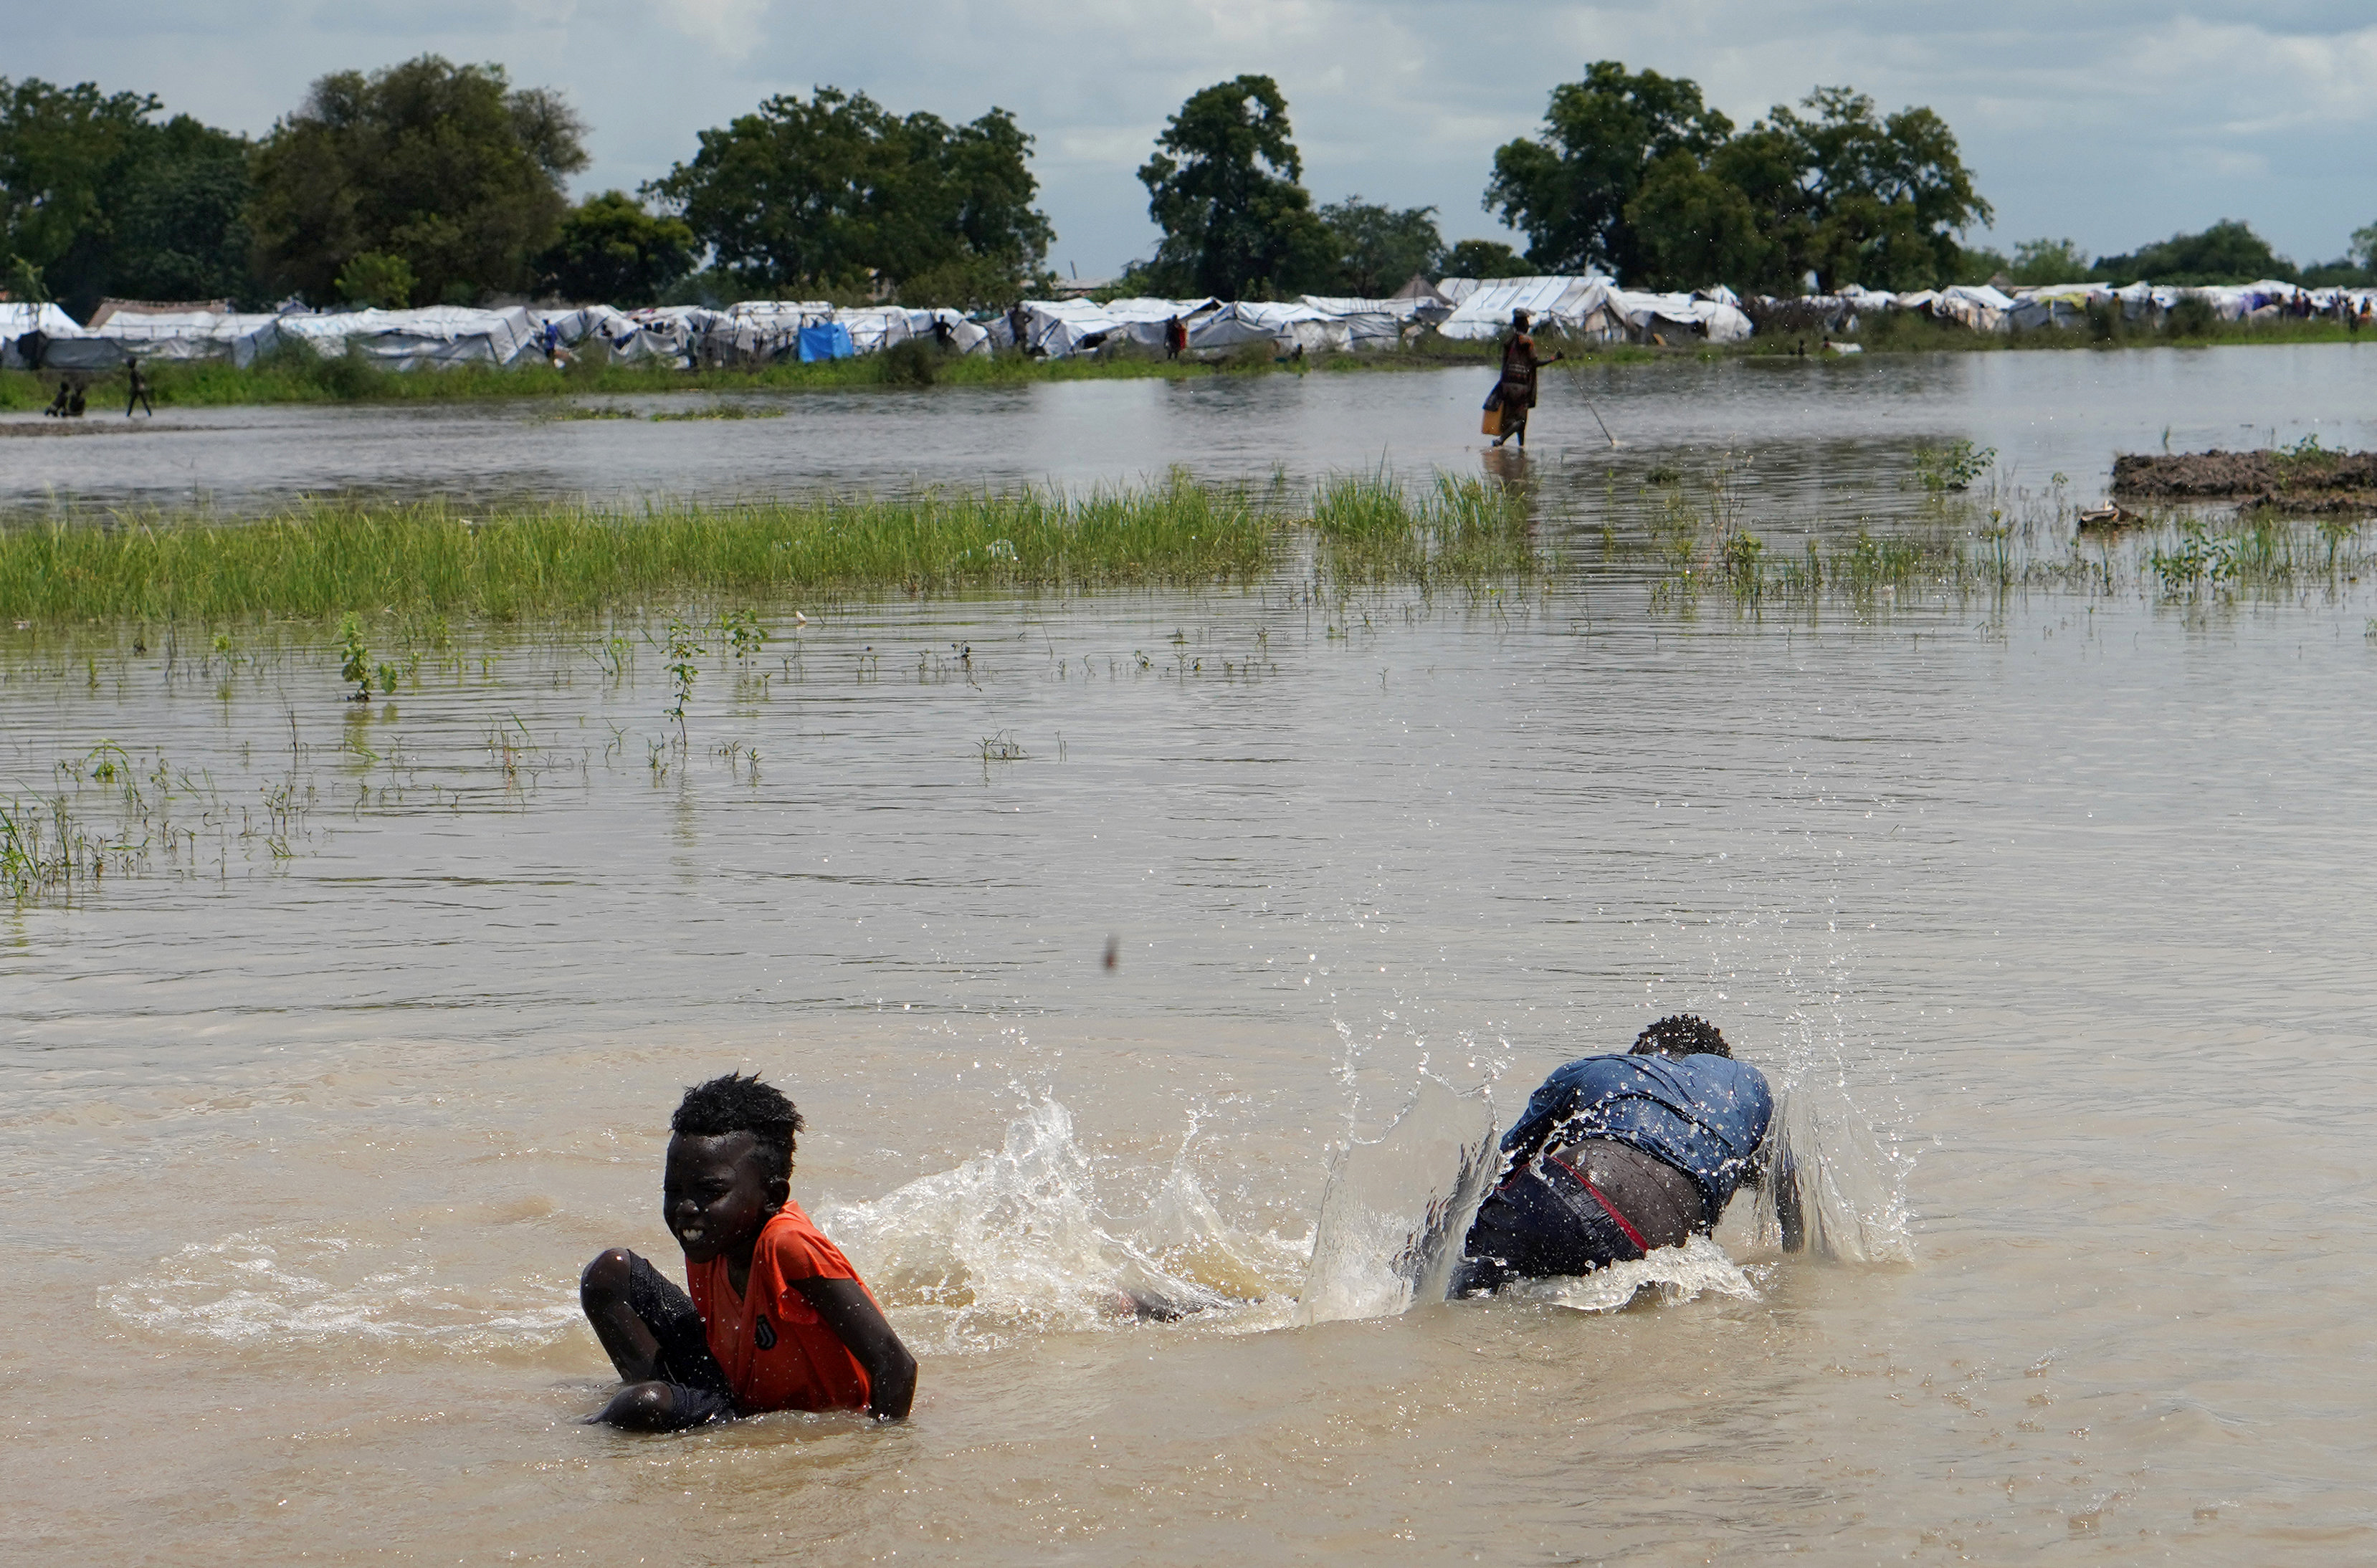 Children play in floodwaters at the airstrip after the River Nile broke the dykes in Pibor, Greater Pibor Administrative Area, South Sudan October 6, 2020. REUTERS/Andreea Campeanu